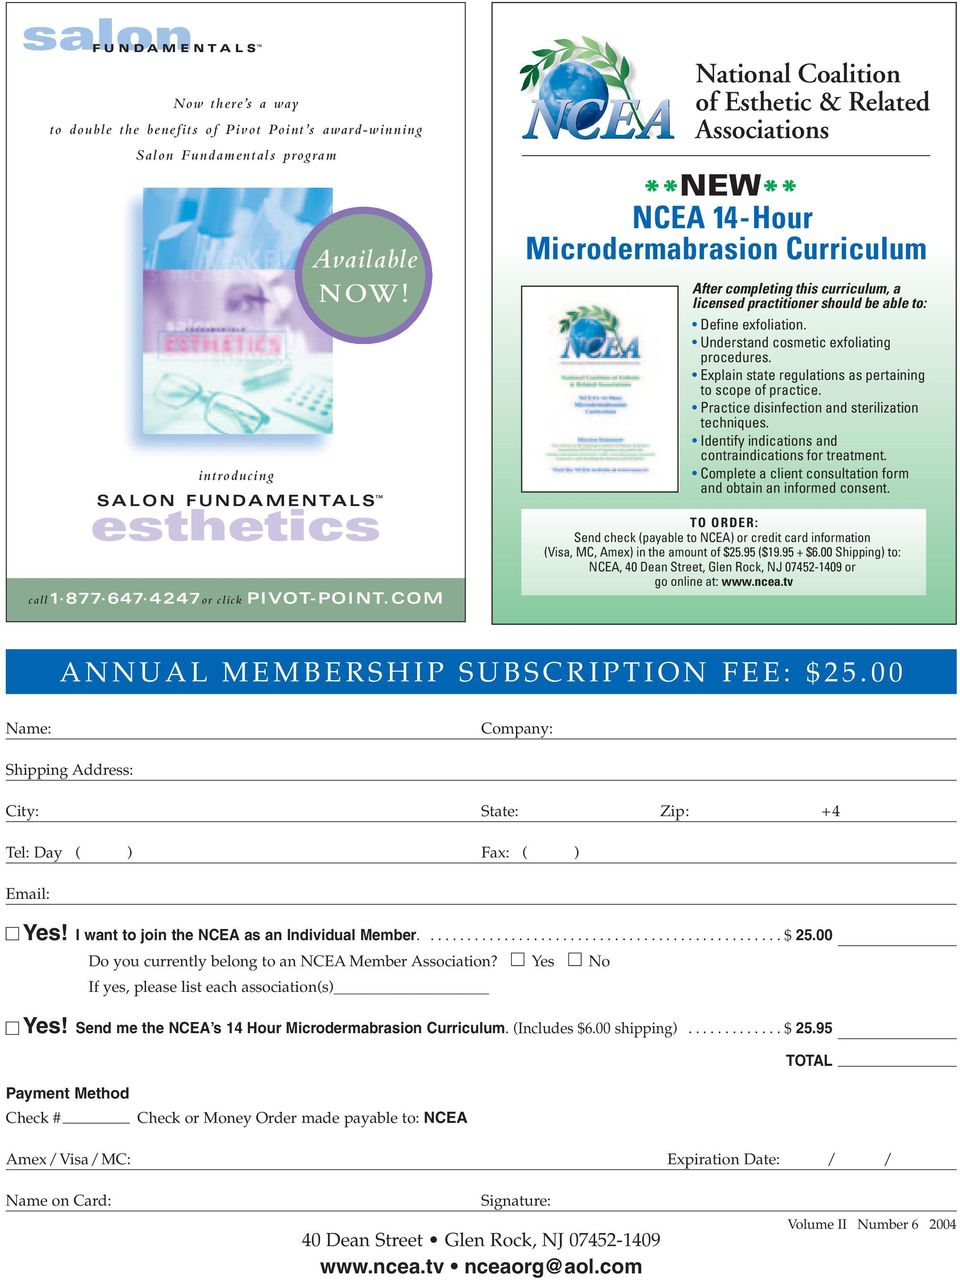 COM National Coalition of Esthetic & Related Associations **NEW** NCEA 14-Hour Microdermabrasion Curriculum After completing this curriculum, a licensed practitioner should be able to: Define